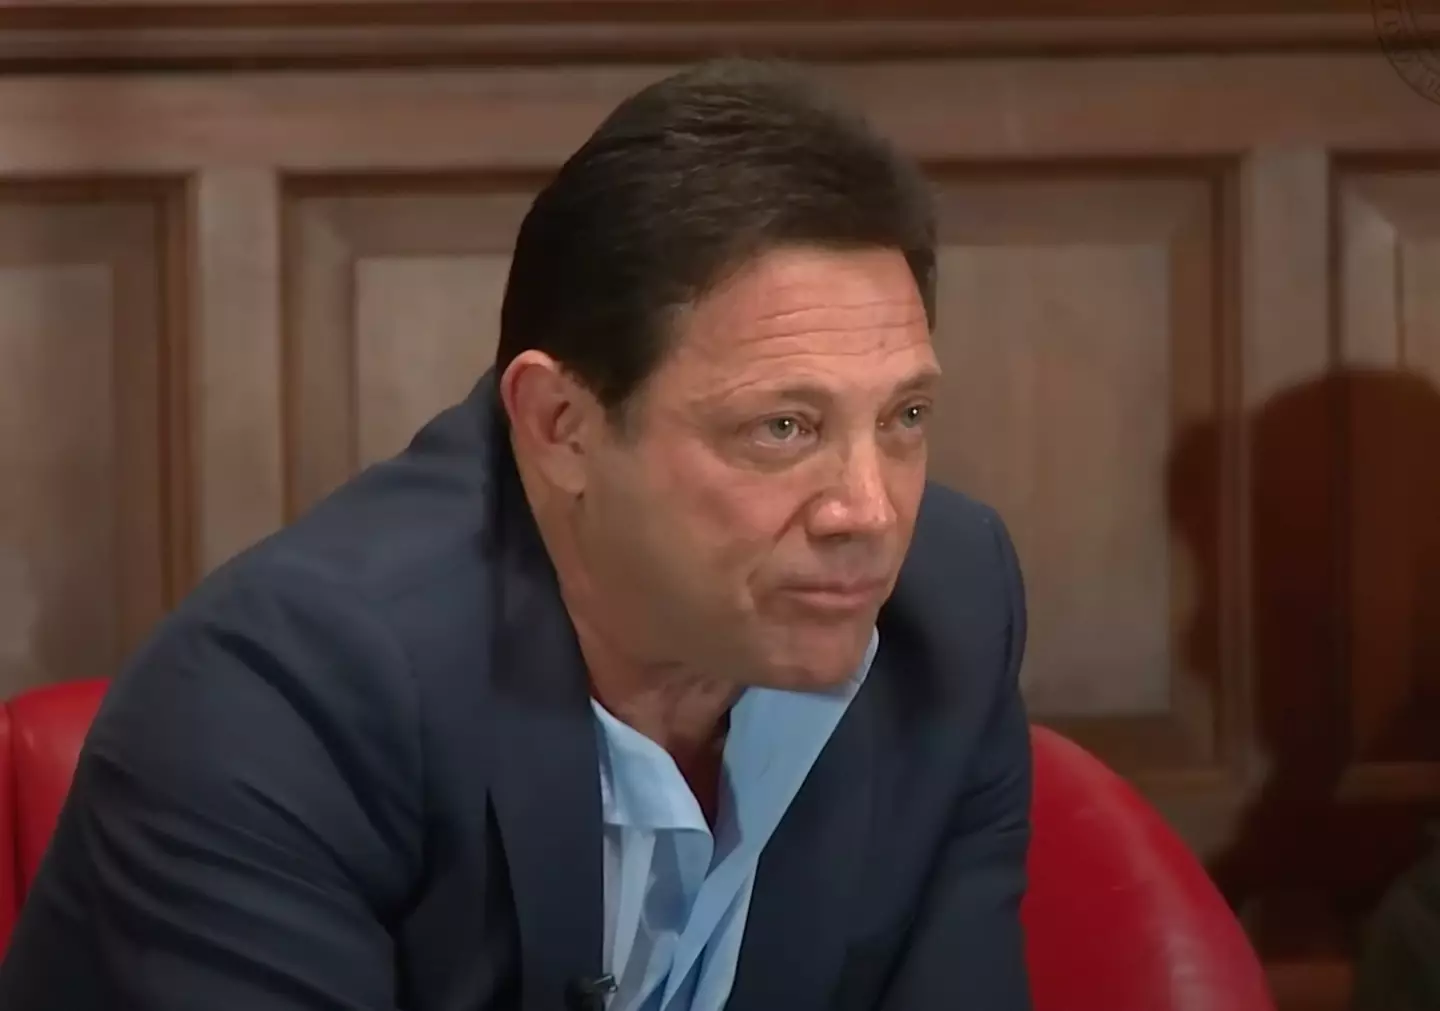 In order to create the level of authenticity needed to play Donnie Azoff he had to speak to the man himself, Jordan Belfort.